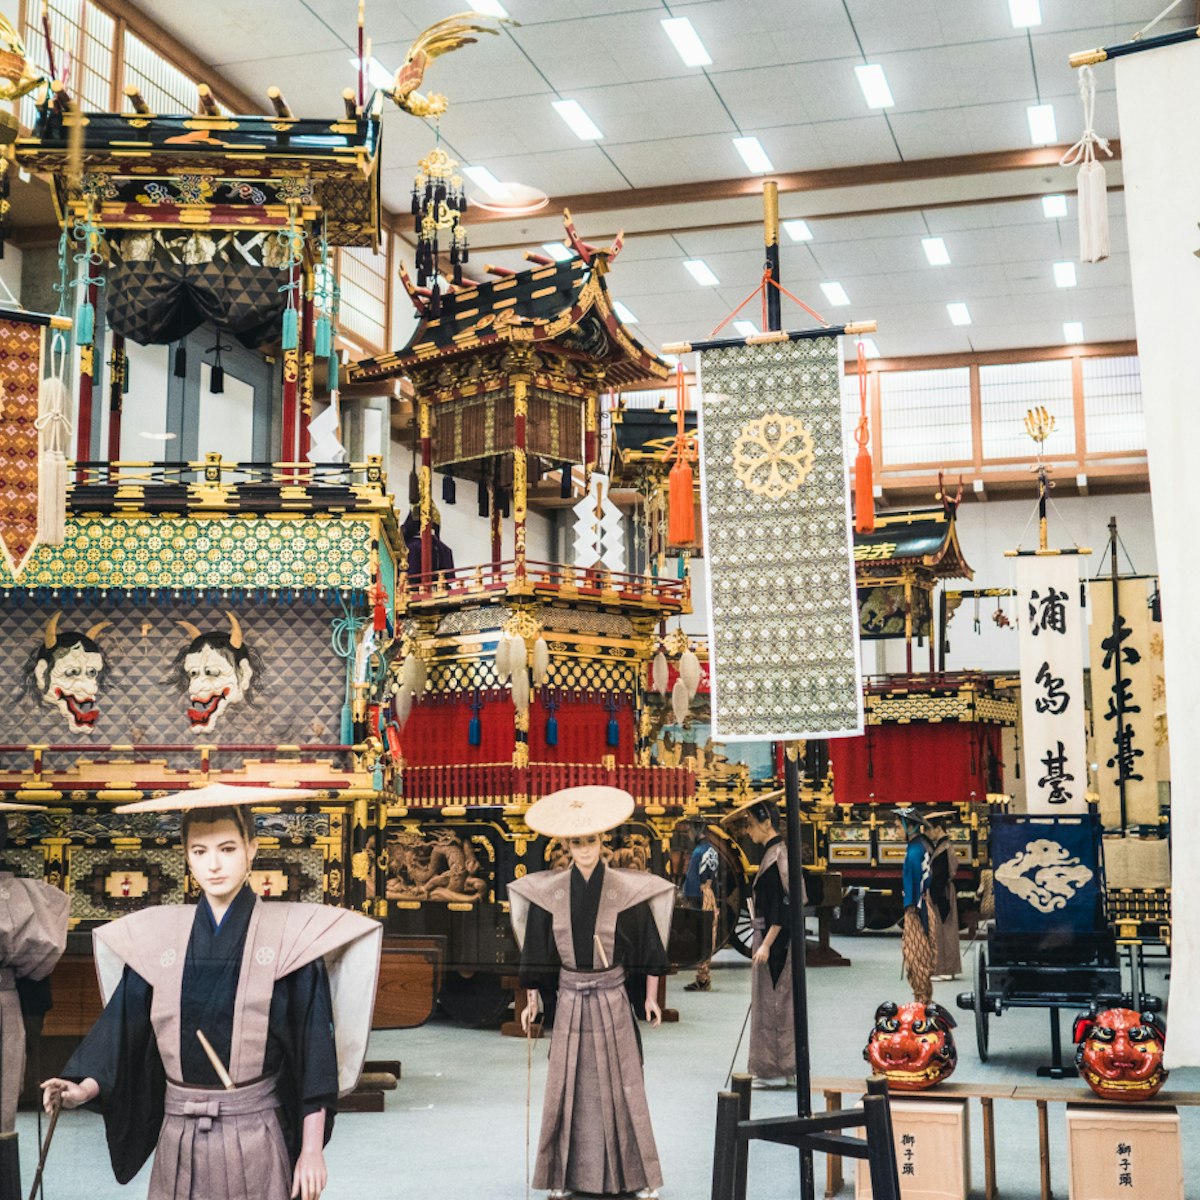 TAKAYAMA JAPAN - May 12, 2017 : Takayama Matsuri Yataikaikan / the annual festival floats exhibition hall in Takayama city; Shutterstock ID 643427659; Your name (First / Last): Laura Crawford; GL account no.: 65050; Netsuite department name: Online Editorial; Full Product or Project name including edition: BiA: Takayama, south of Tokyo POI images for online